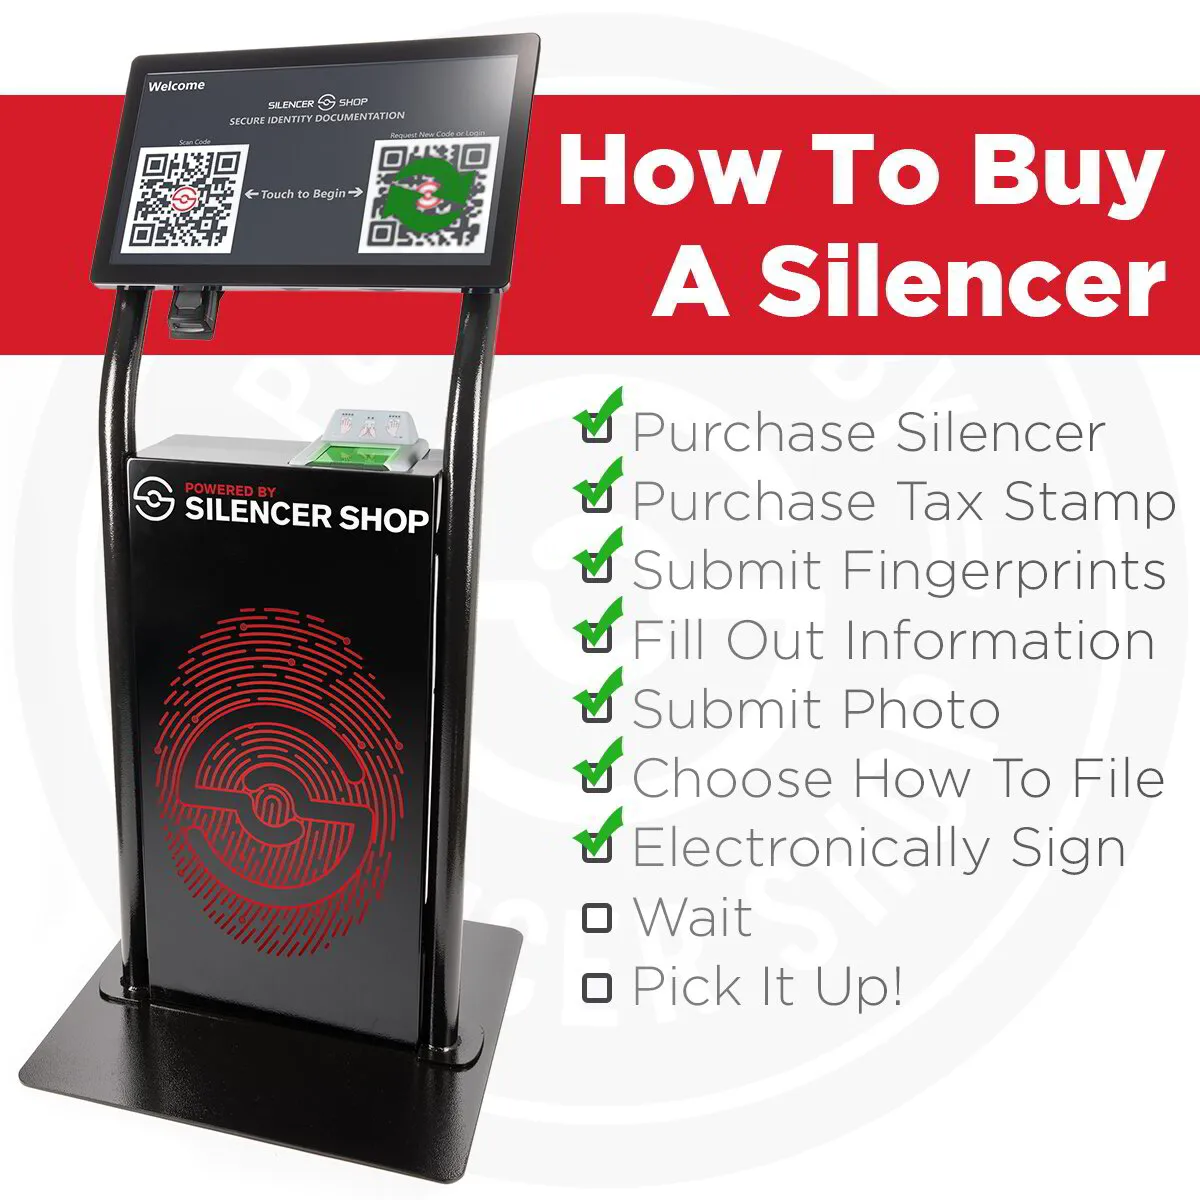 How to buy a silencer image